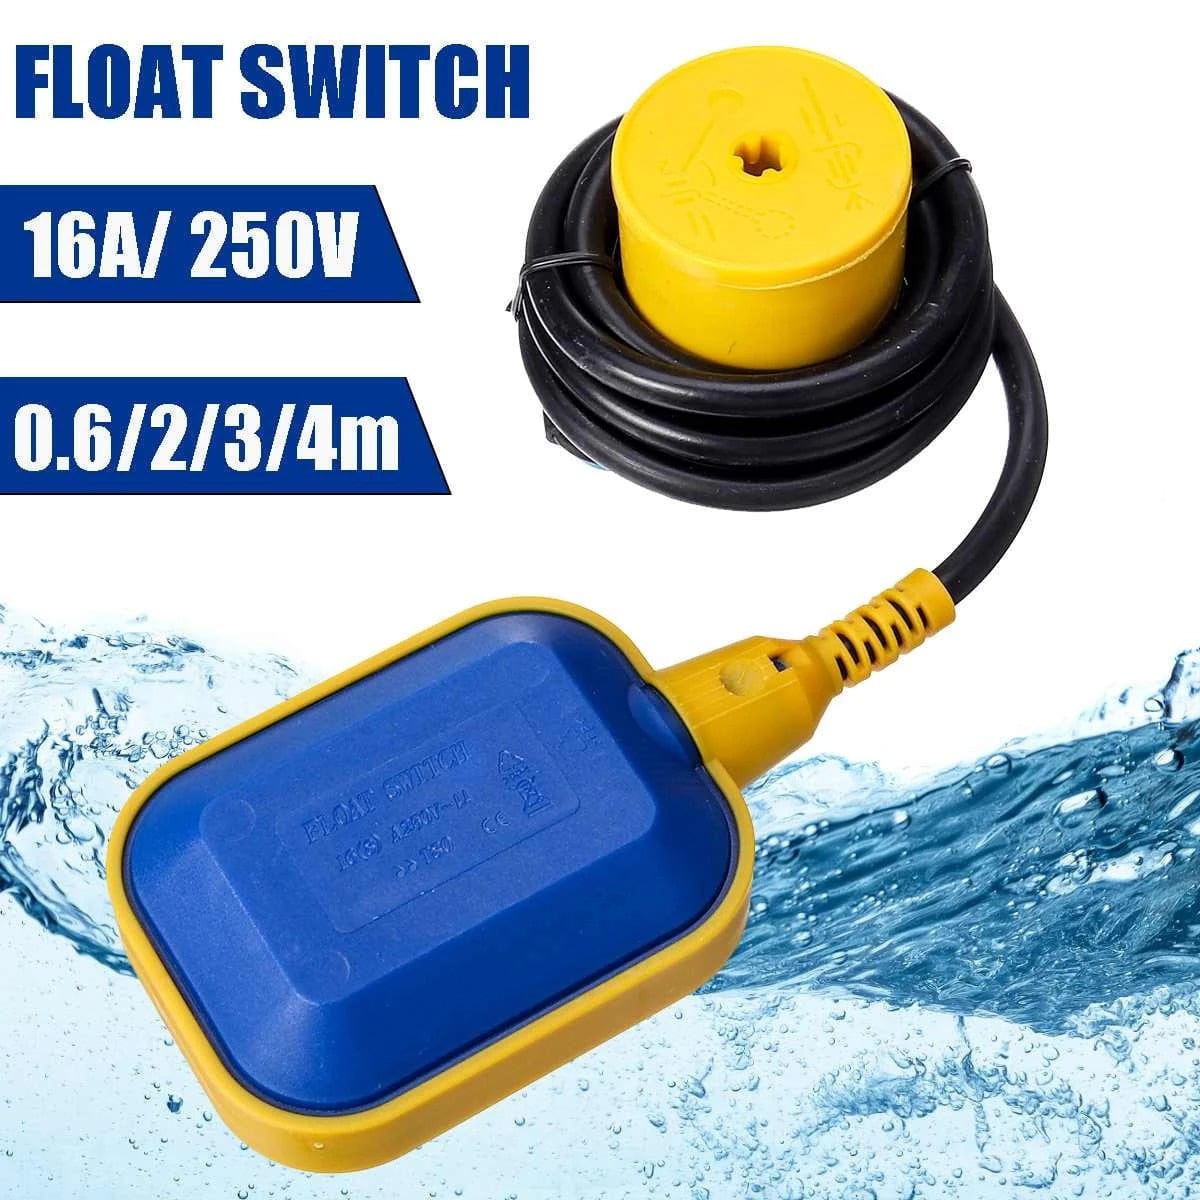 Float Switch Water Level Controller for Tank Pump | Supply Master | Accra, Ghana Pump Control Buy Tools hardware Building materials